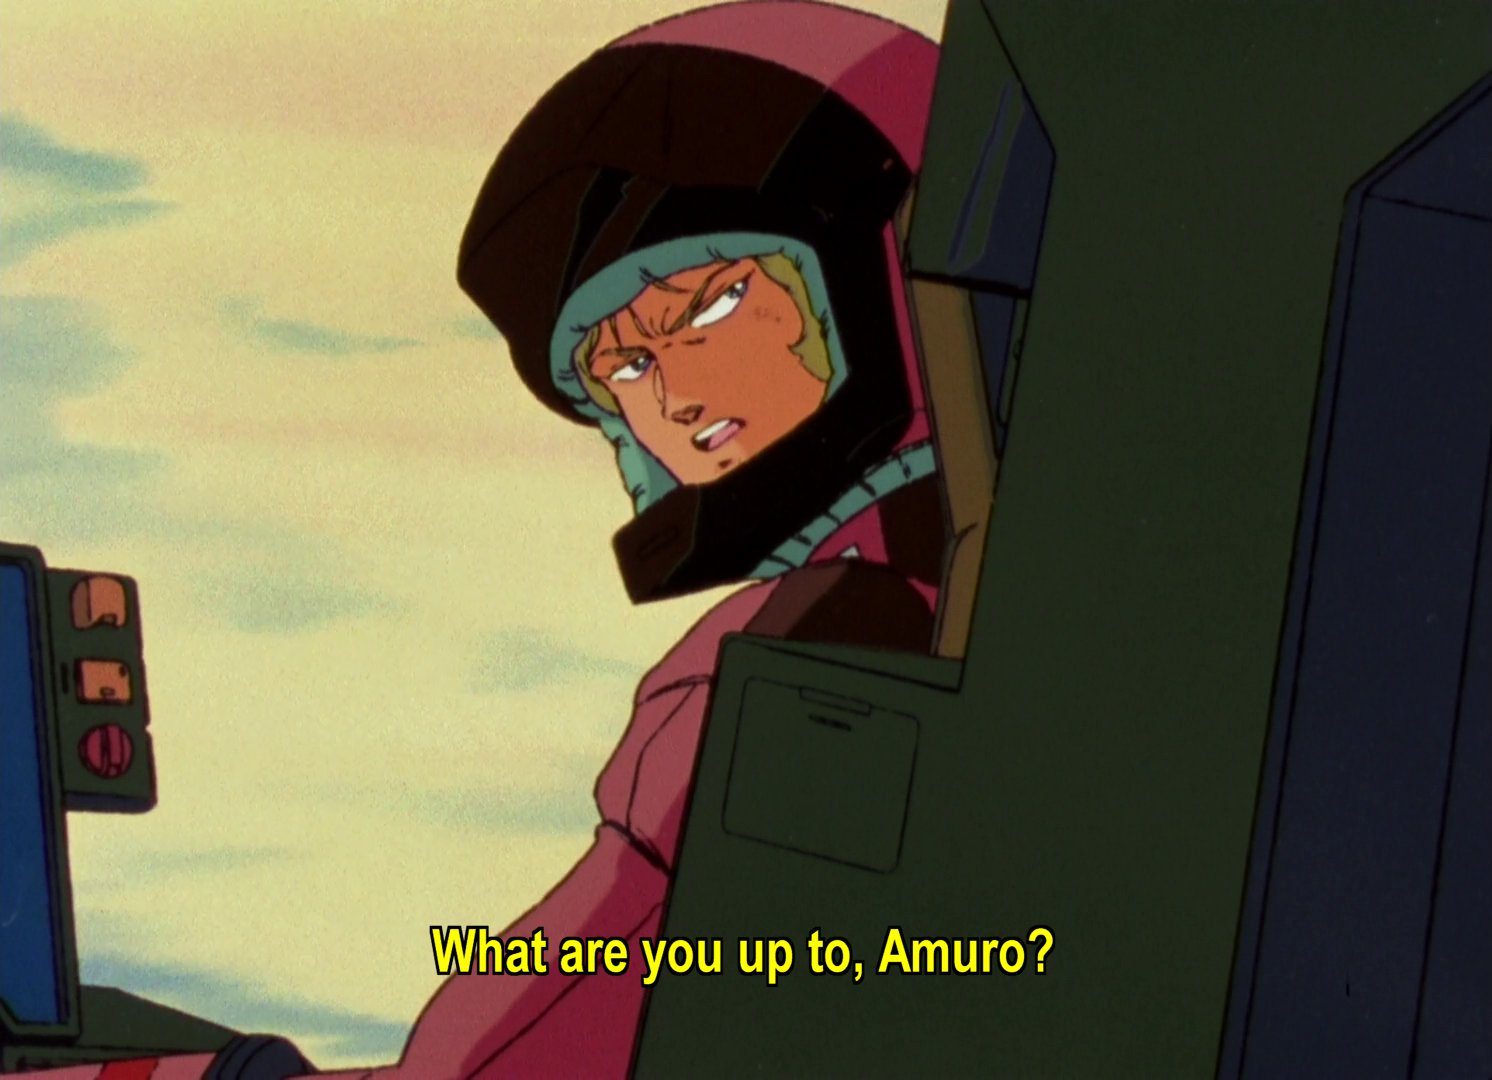 Lt Quattro in his Gundam, looking back: What areyou up to, Amuro?